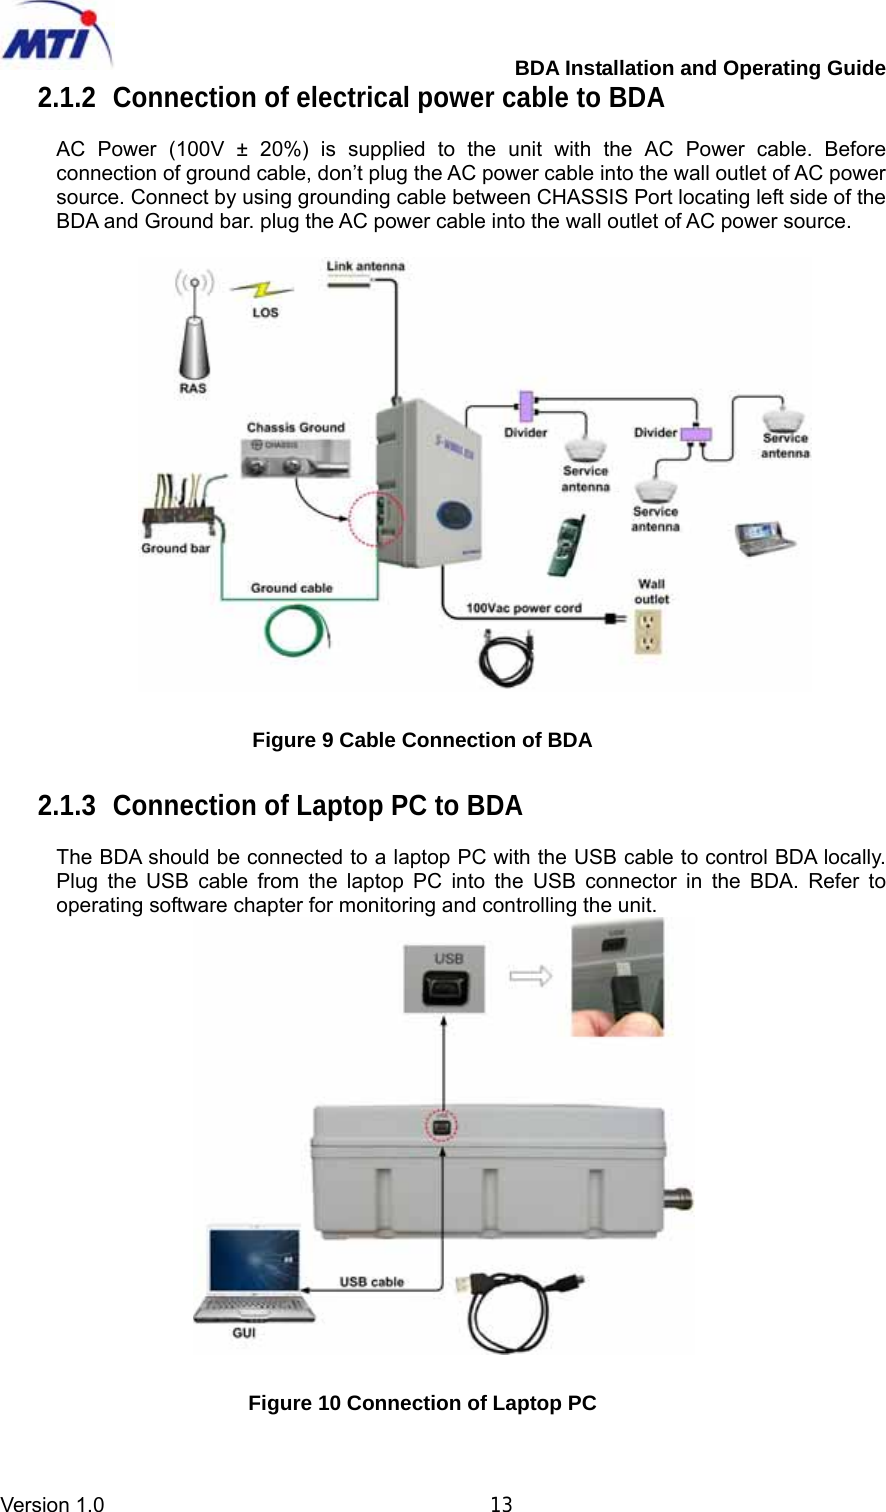         BDA Installation and Operating Guide Version 1.0                                       13 2.1.2  Connection of electrical power cable to BDA  AC Power (100V ± 20%) is supplied to the unit with the AC Power cable. Before connection of ground cable, don’t plug the AC power cable into the wall outlet of AC power source. Connect by using grounding cable between CHASSIS Port locating left side of the BDA and Ground bar. plug the AC power cable into the wall outlet of AC power source.            Figure 9 Cable Connection of BDA  2.1.3  Connection of Laptop PC to BDA  The BDA should be connected to a laptop PC with the USB cable to control BDA locally. Plug the USB cable from the laptop PC into the USB connector in the BDA. Refer to operating software chapter for monitoring and controlling the unit.   Figure 10 Connection of Laptop PC 